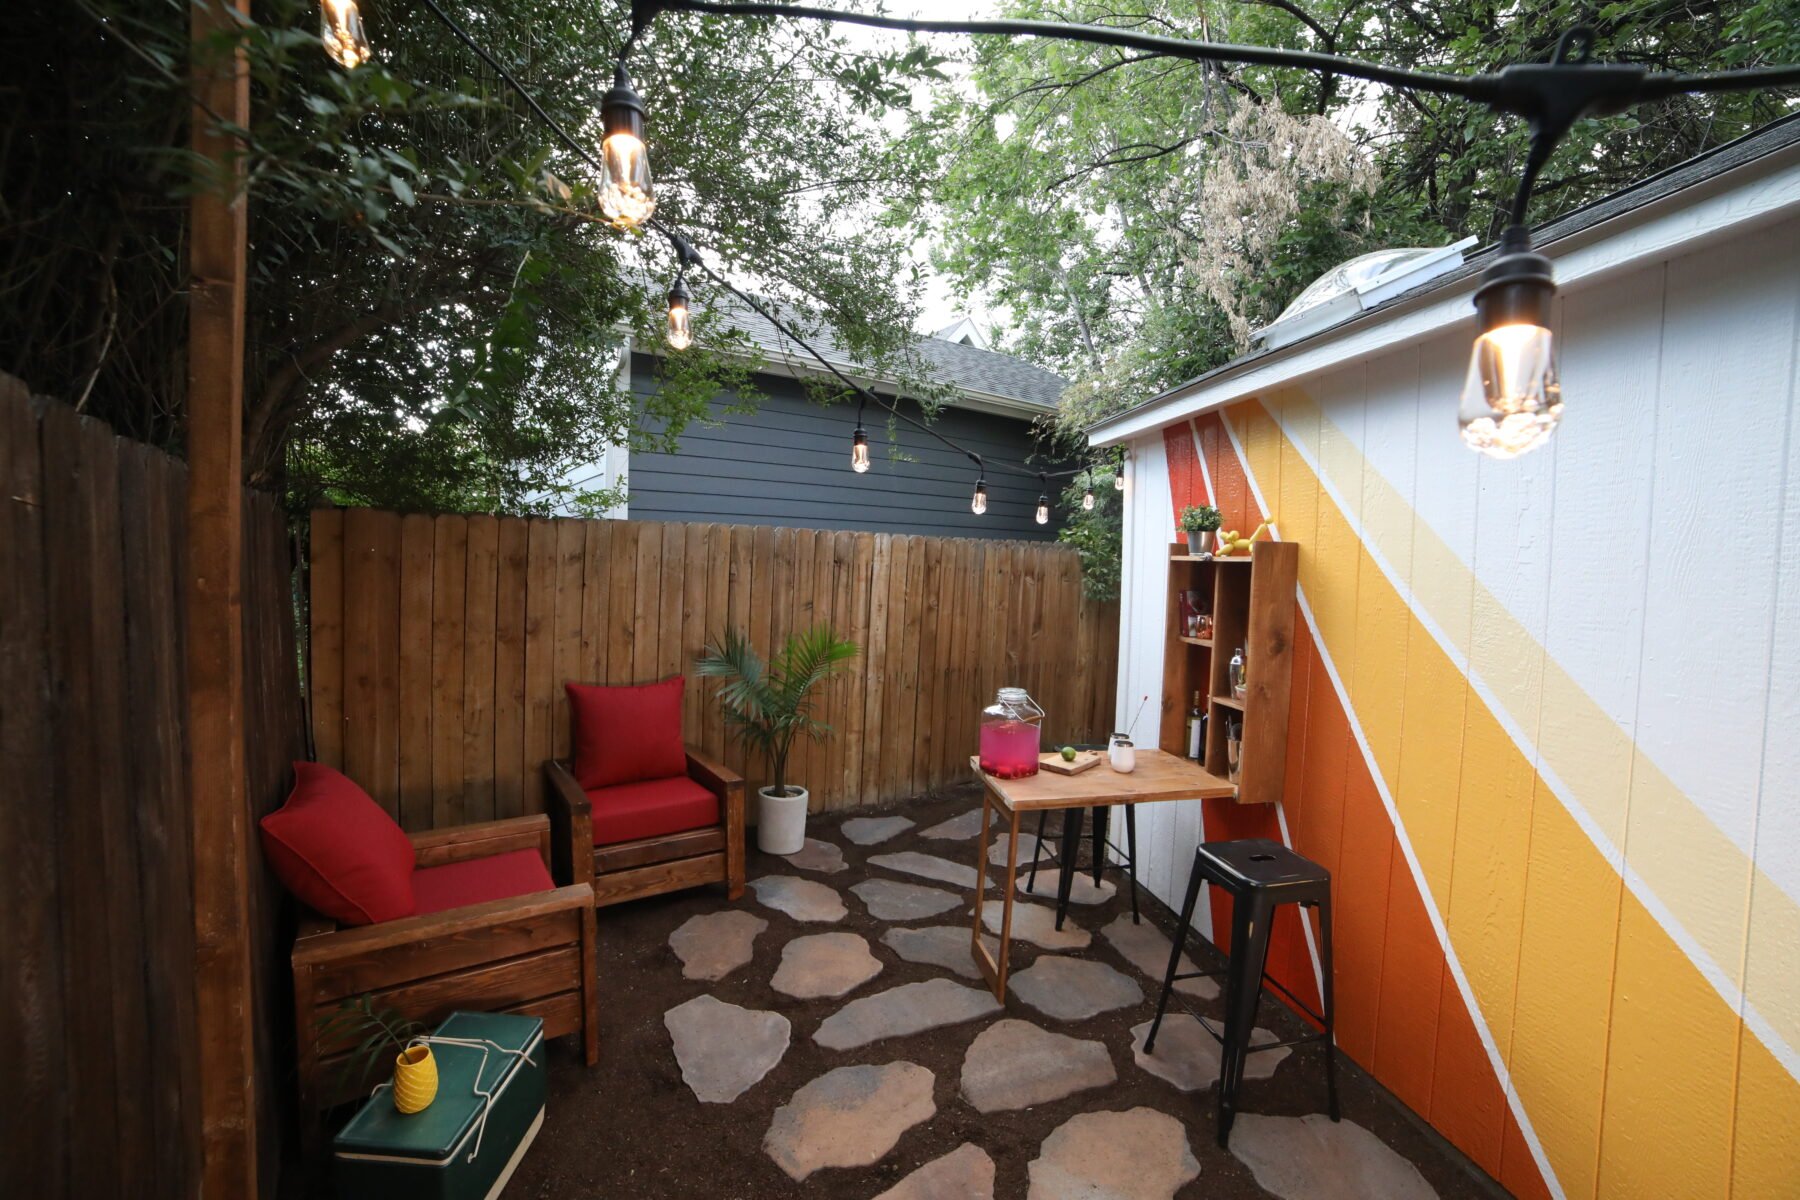 Create a backyard escape after your shed cleaning and spring prep projects.